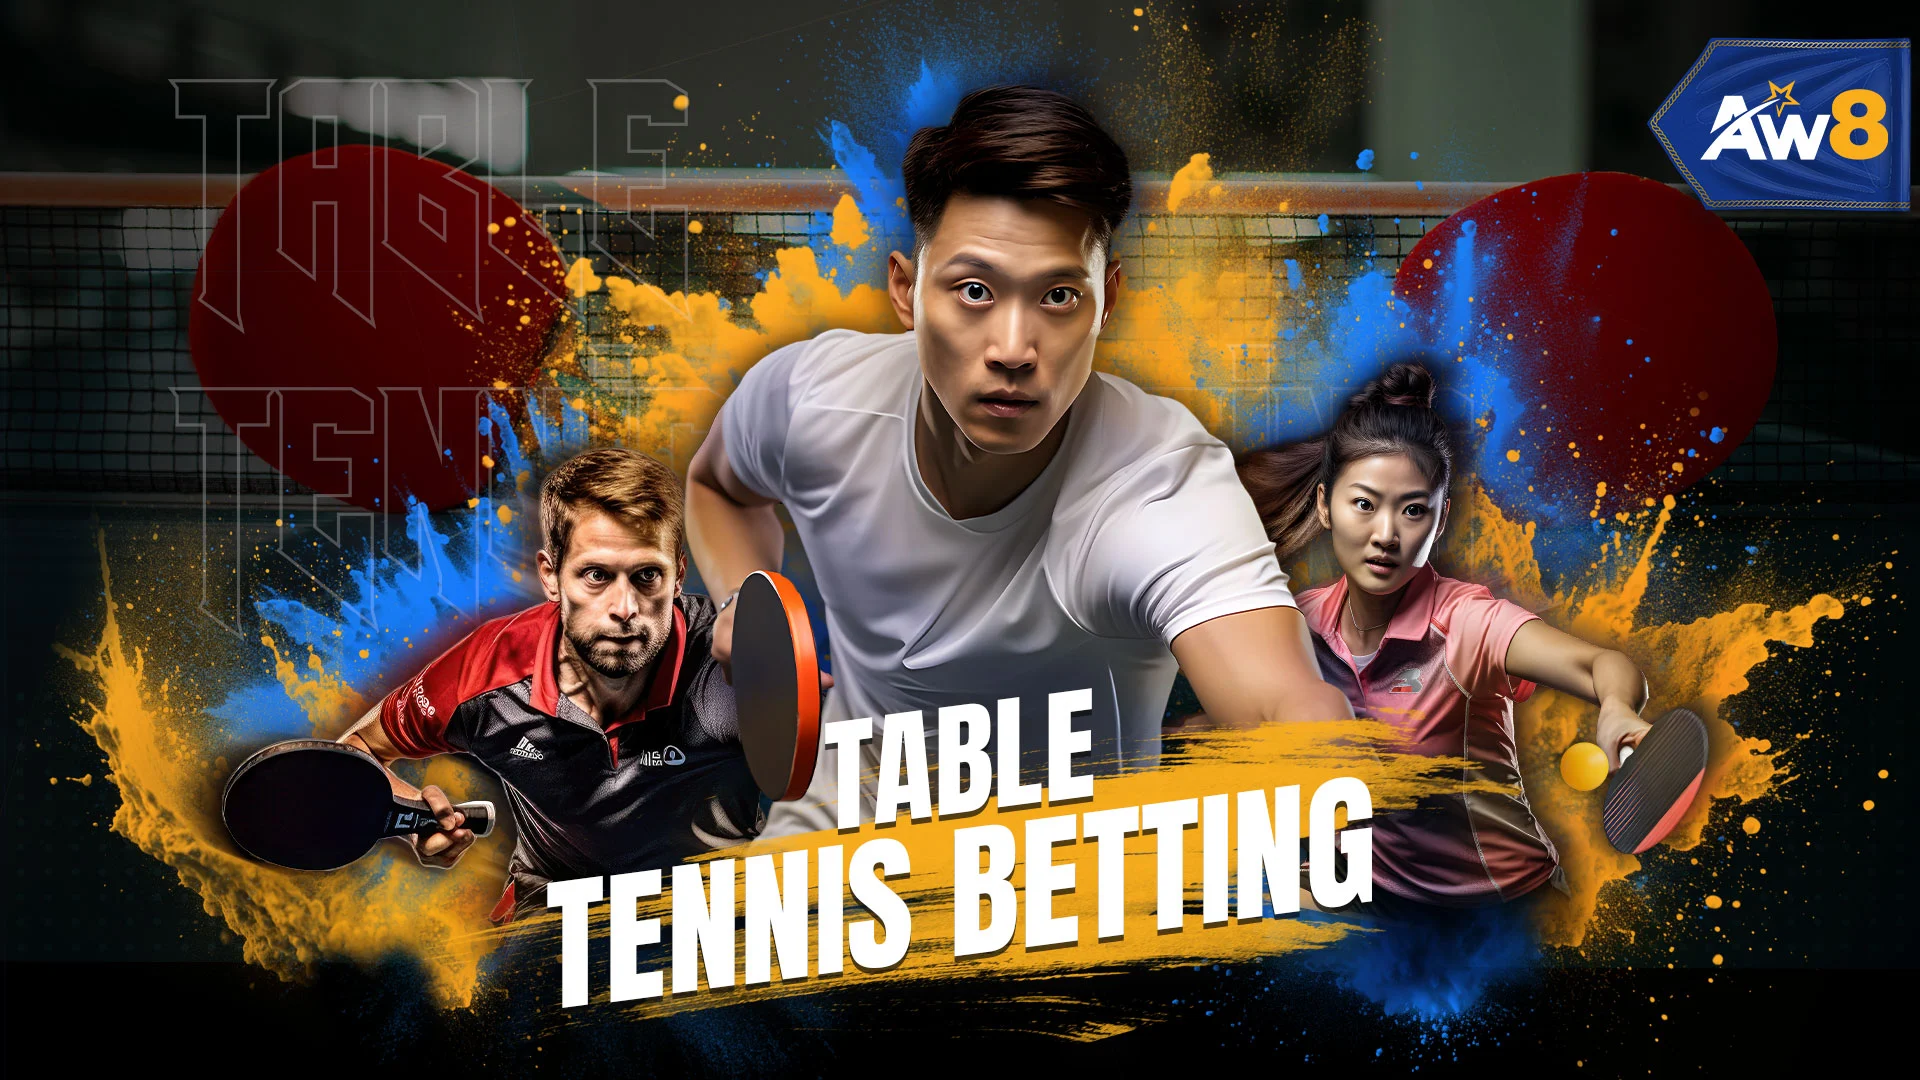 Table-Tennis-Sports-Betting-in-Malaysia-by-AW8